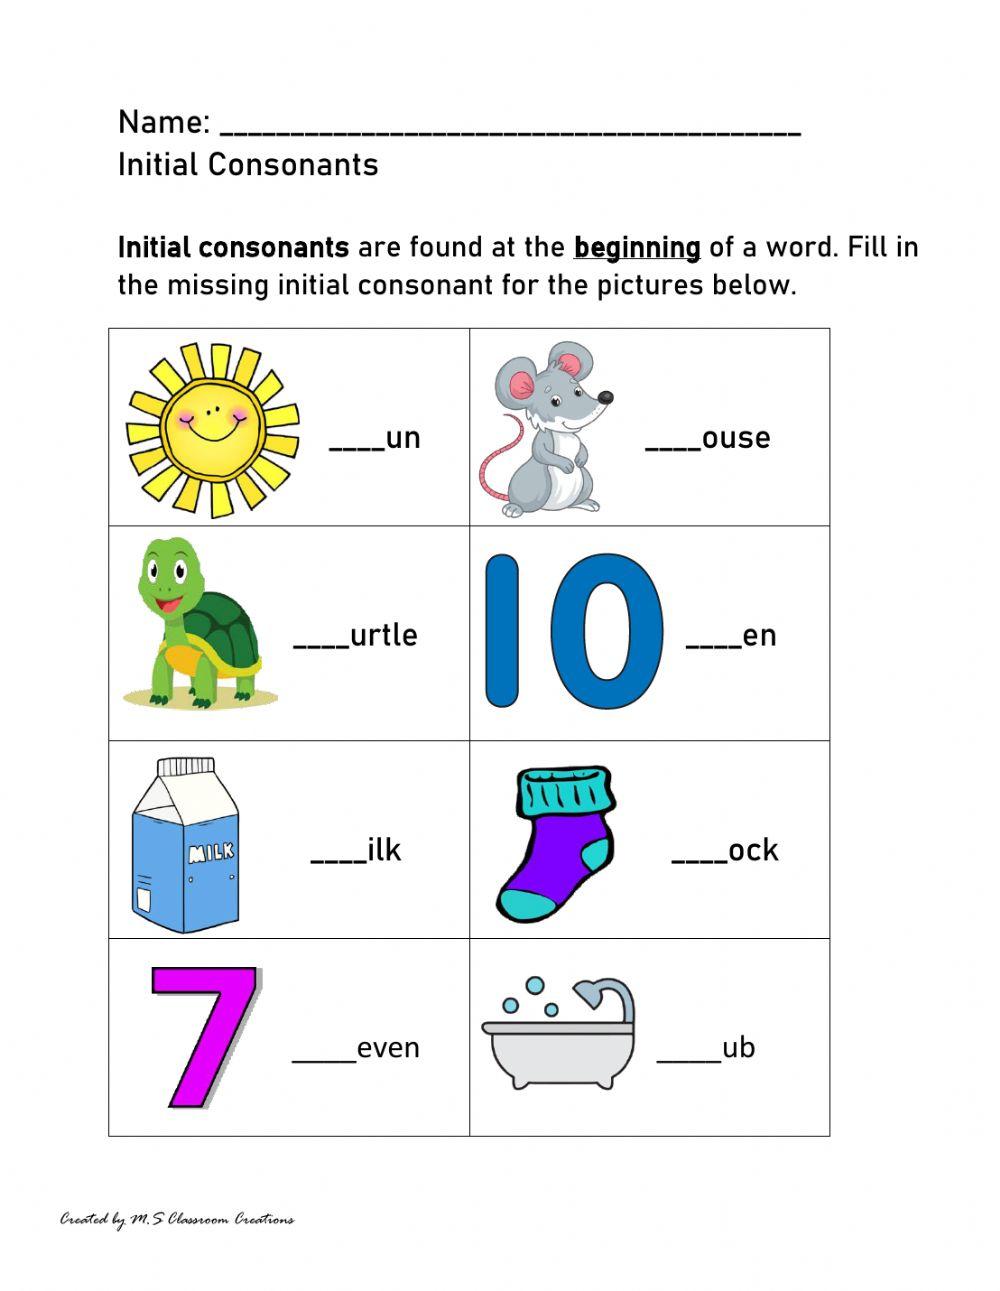 Initial Consonants - S,M and T